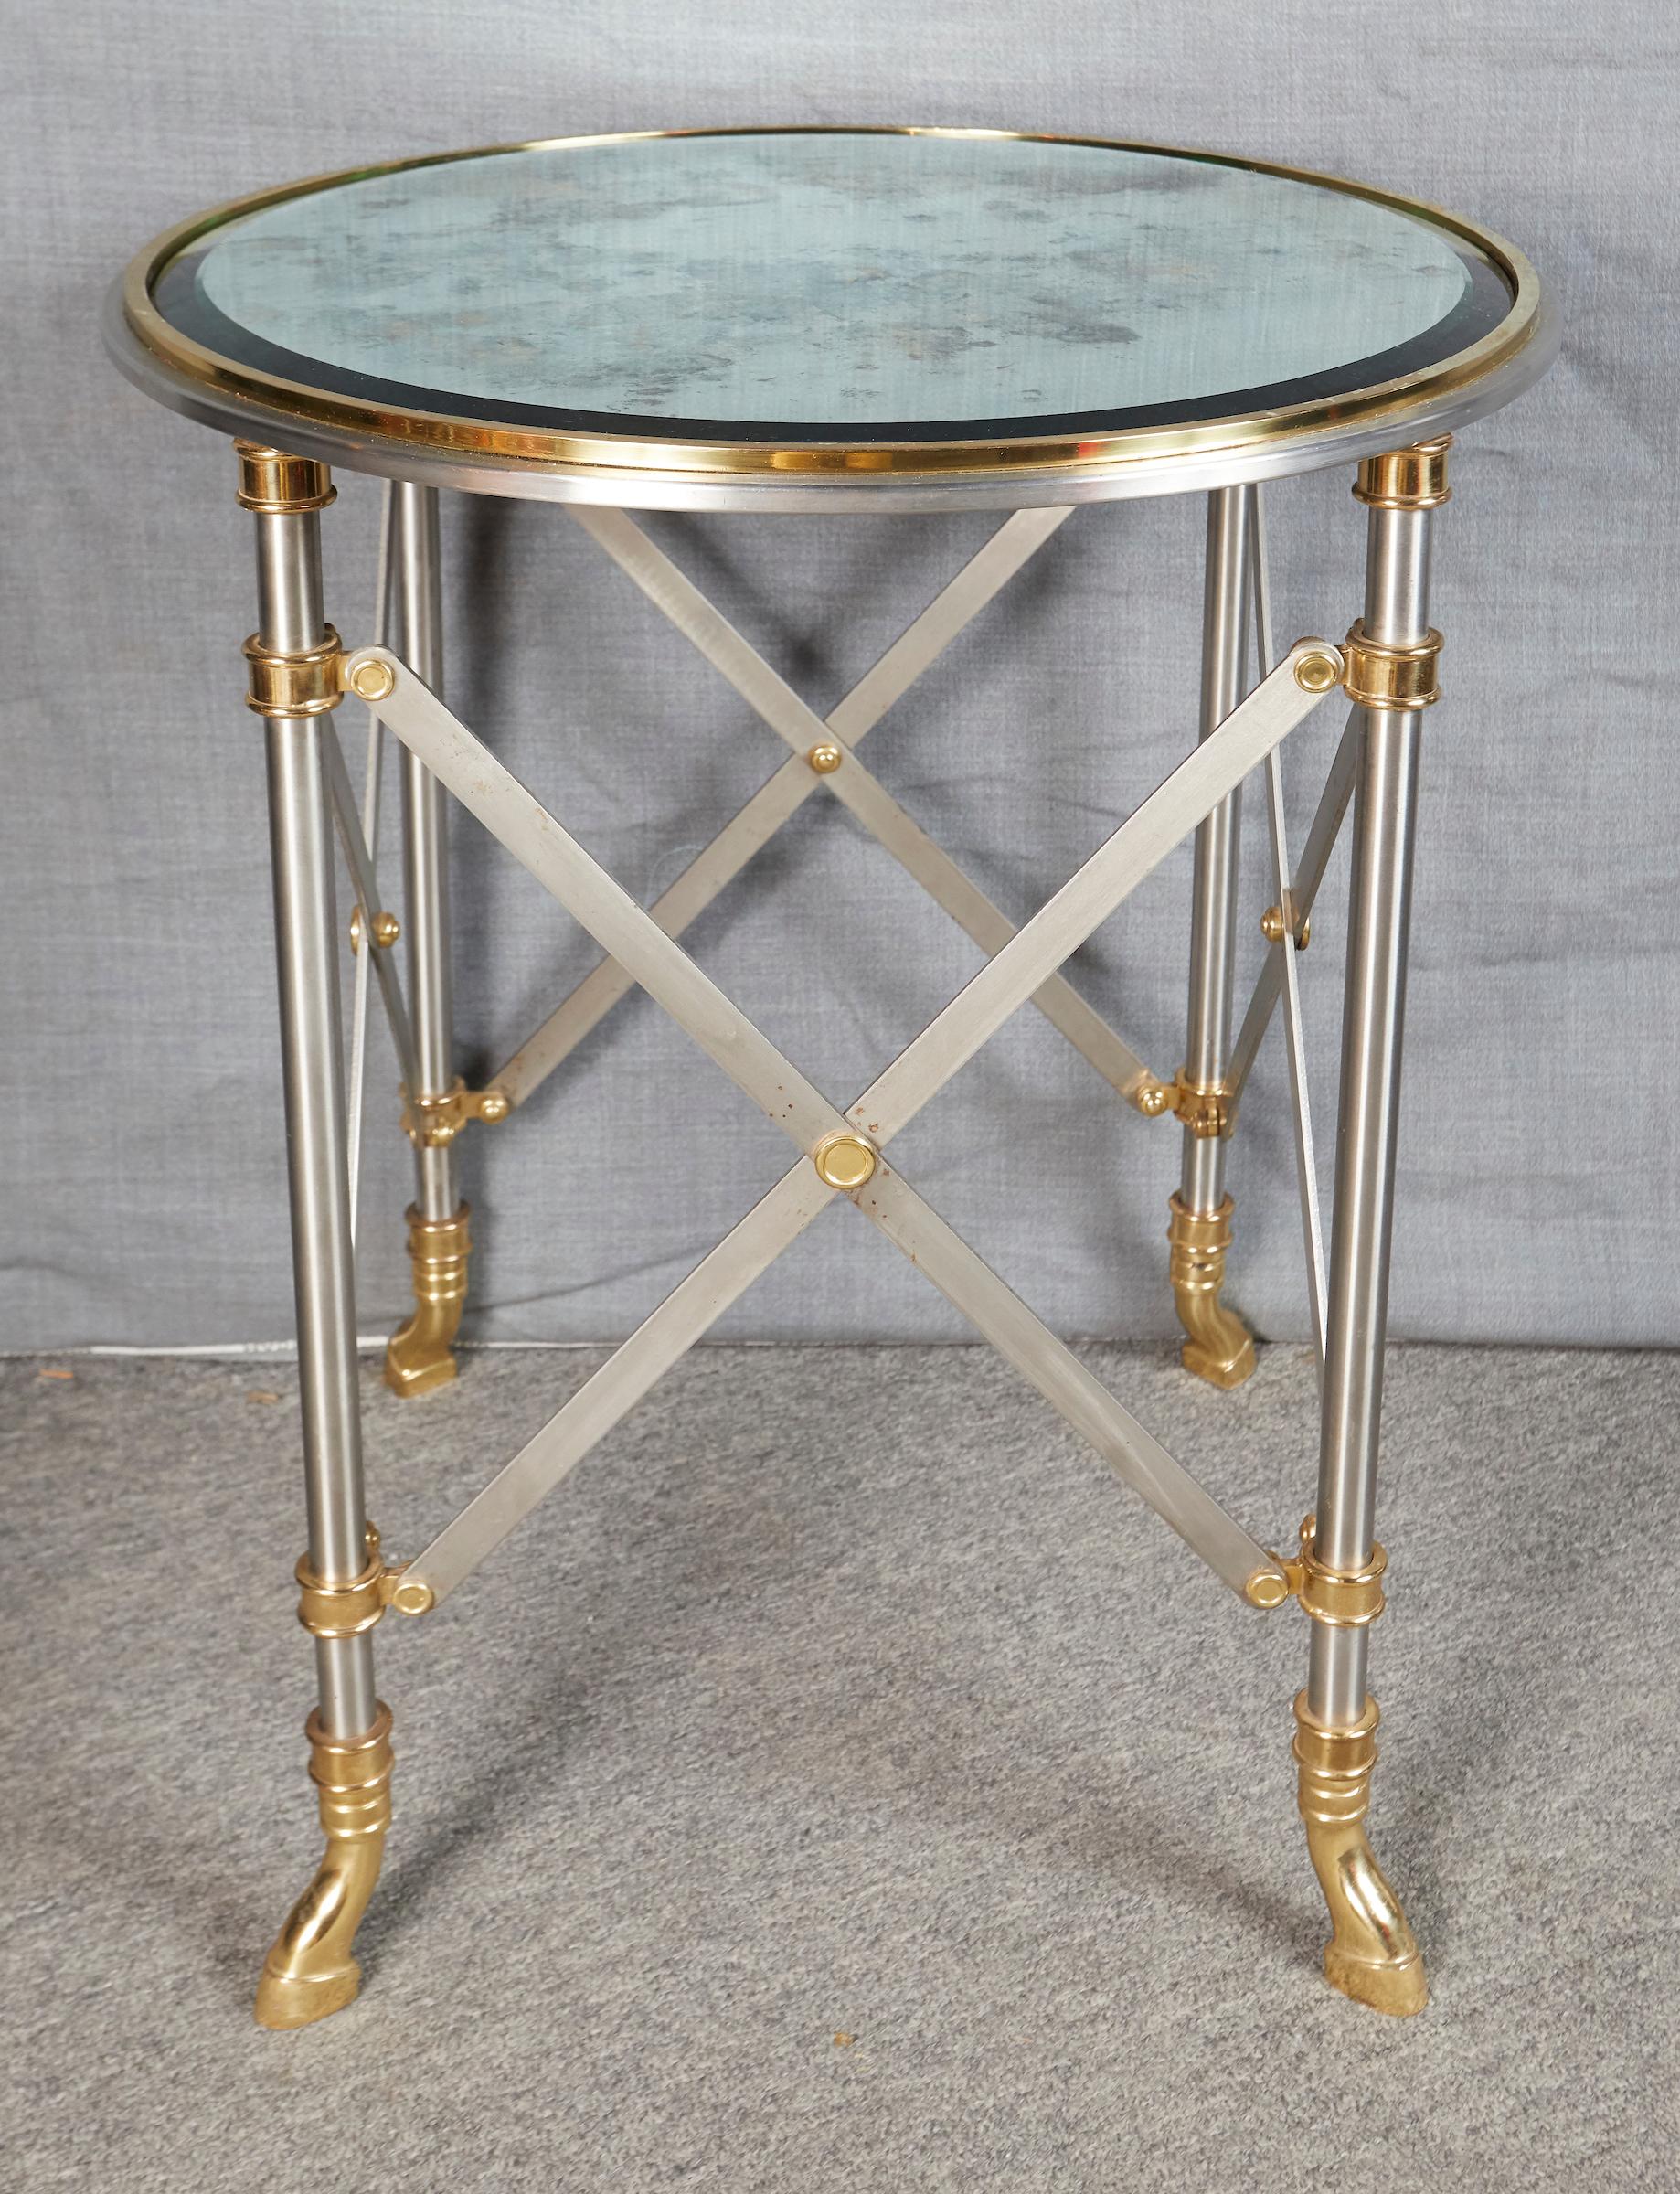 Pair of Brass and Polished Steel Side Tables by Maison Jansen (Mitte des 20. Jahrhunderts)